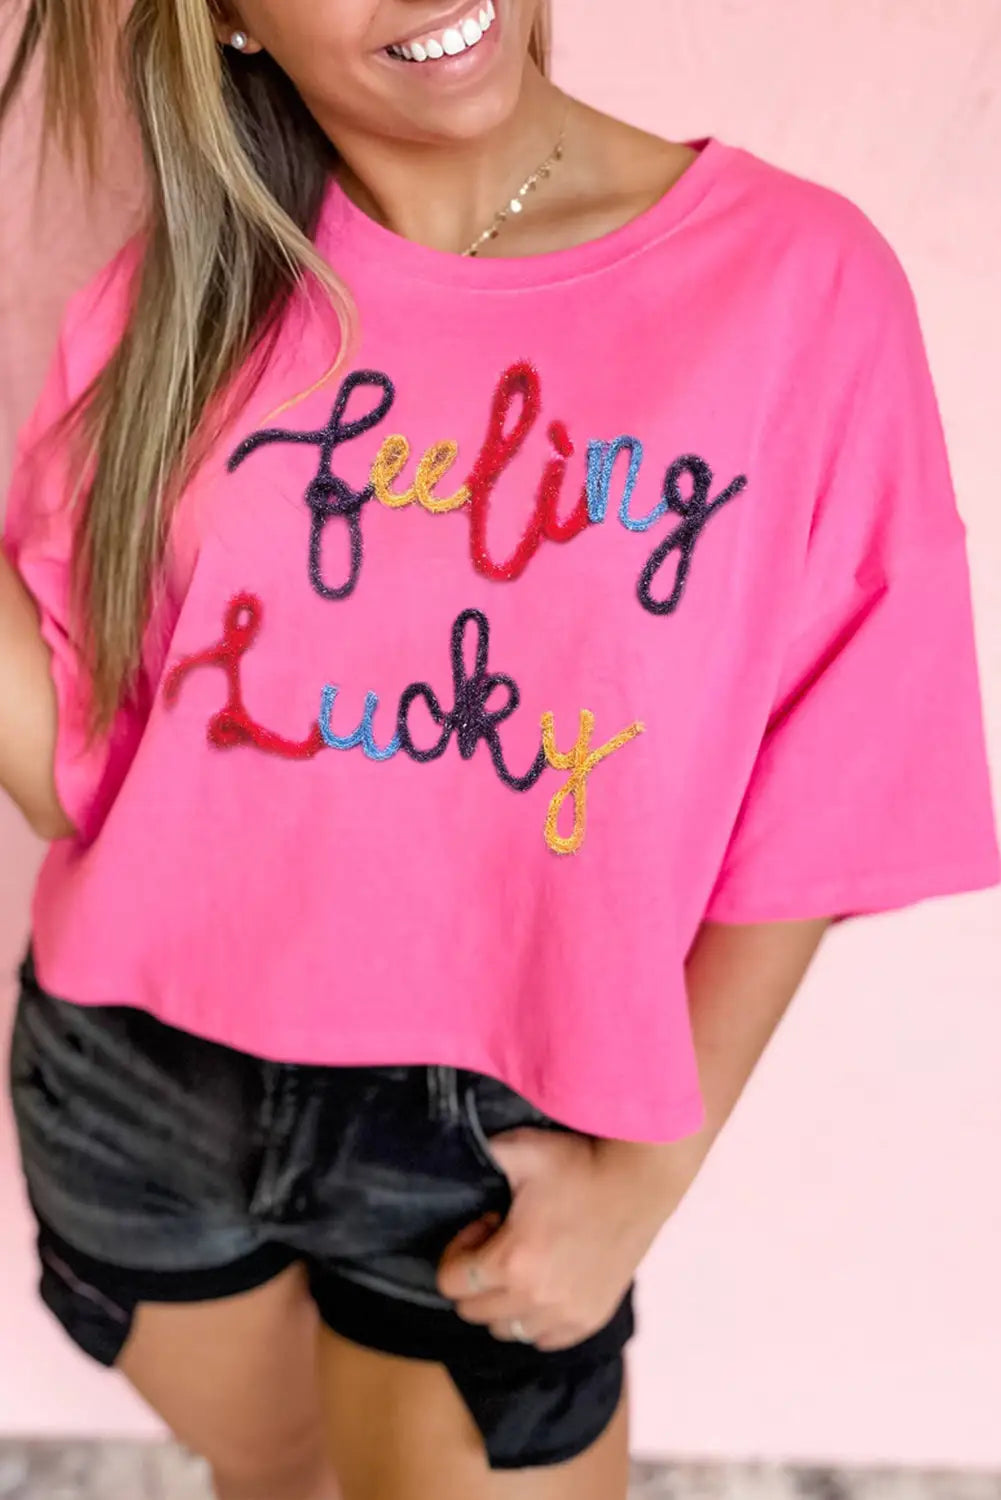 Bonbon feeling lucky embroidered letter graphic half sleeve top - s / 95% cotton + 5% elastane - tops